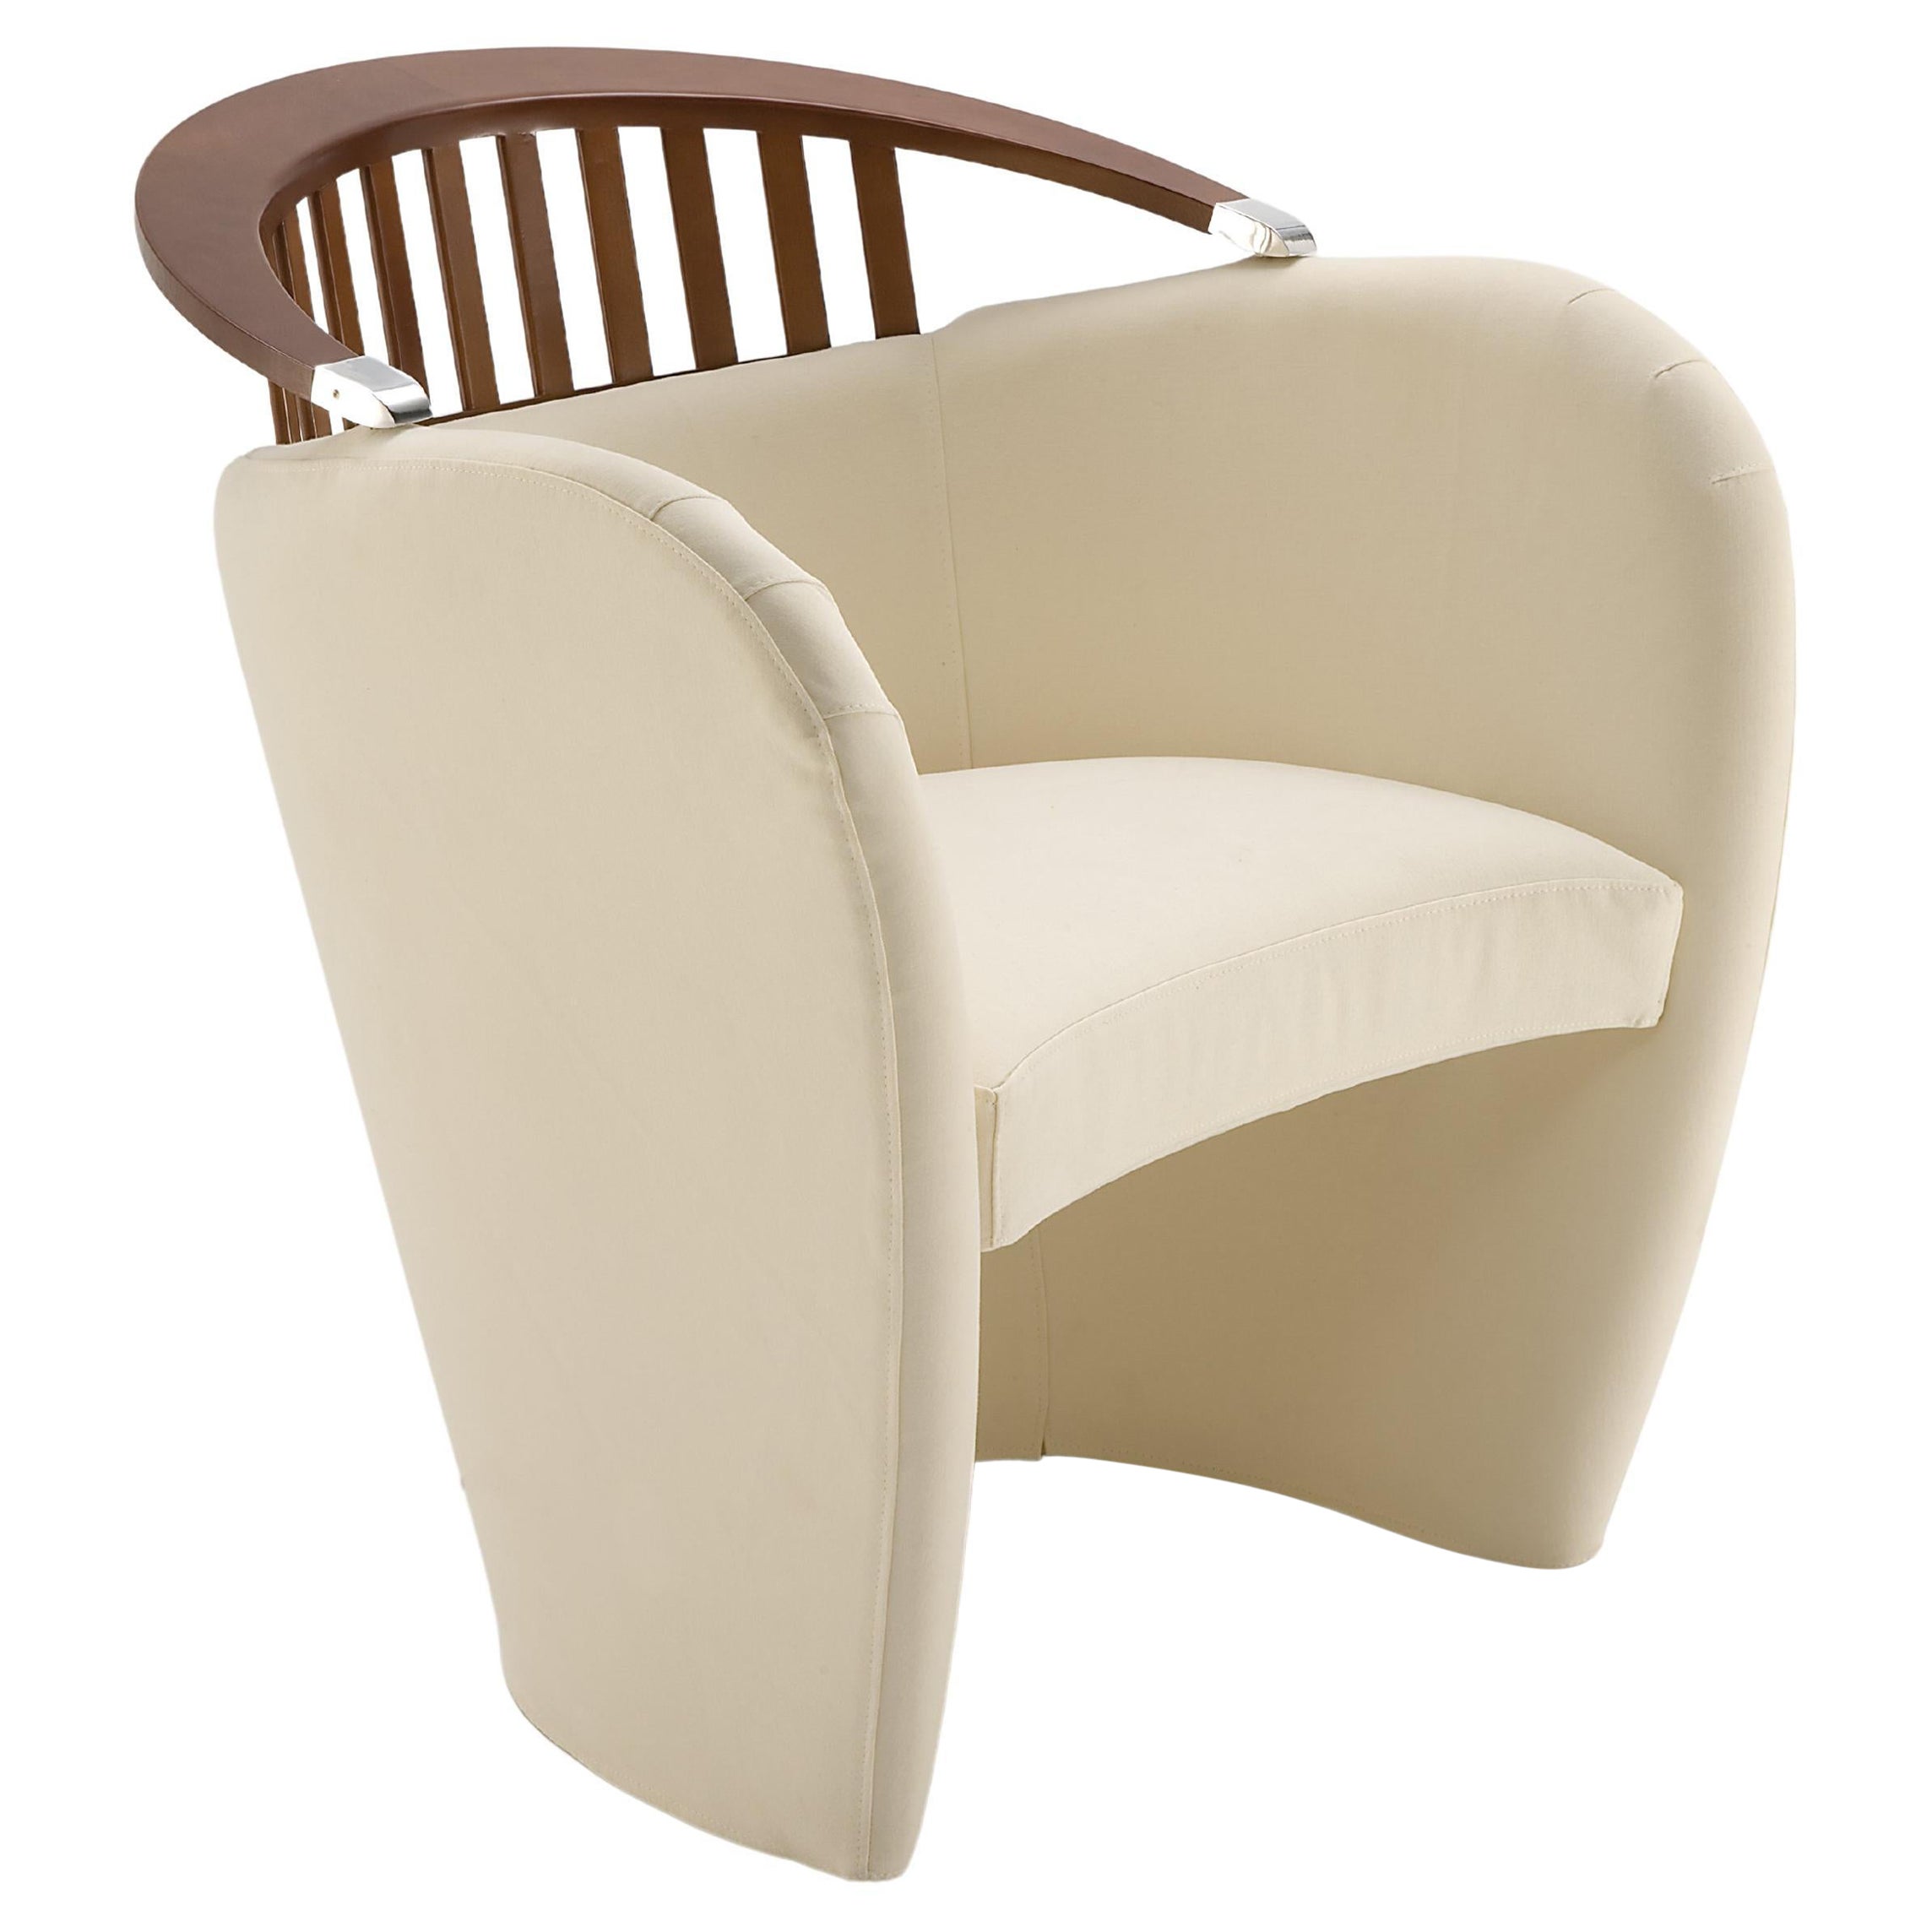 Giovannetti, Armchair with Wooden Backrest from the 90s by M. Matteini, Nausicaa